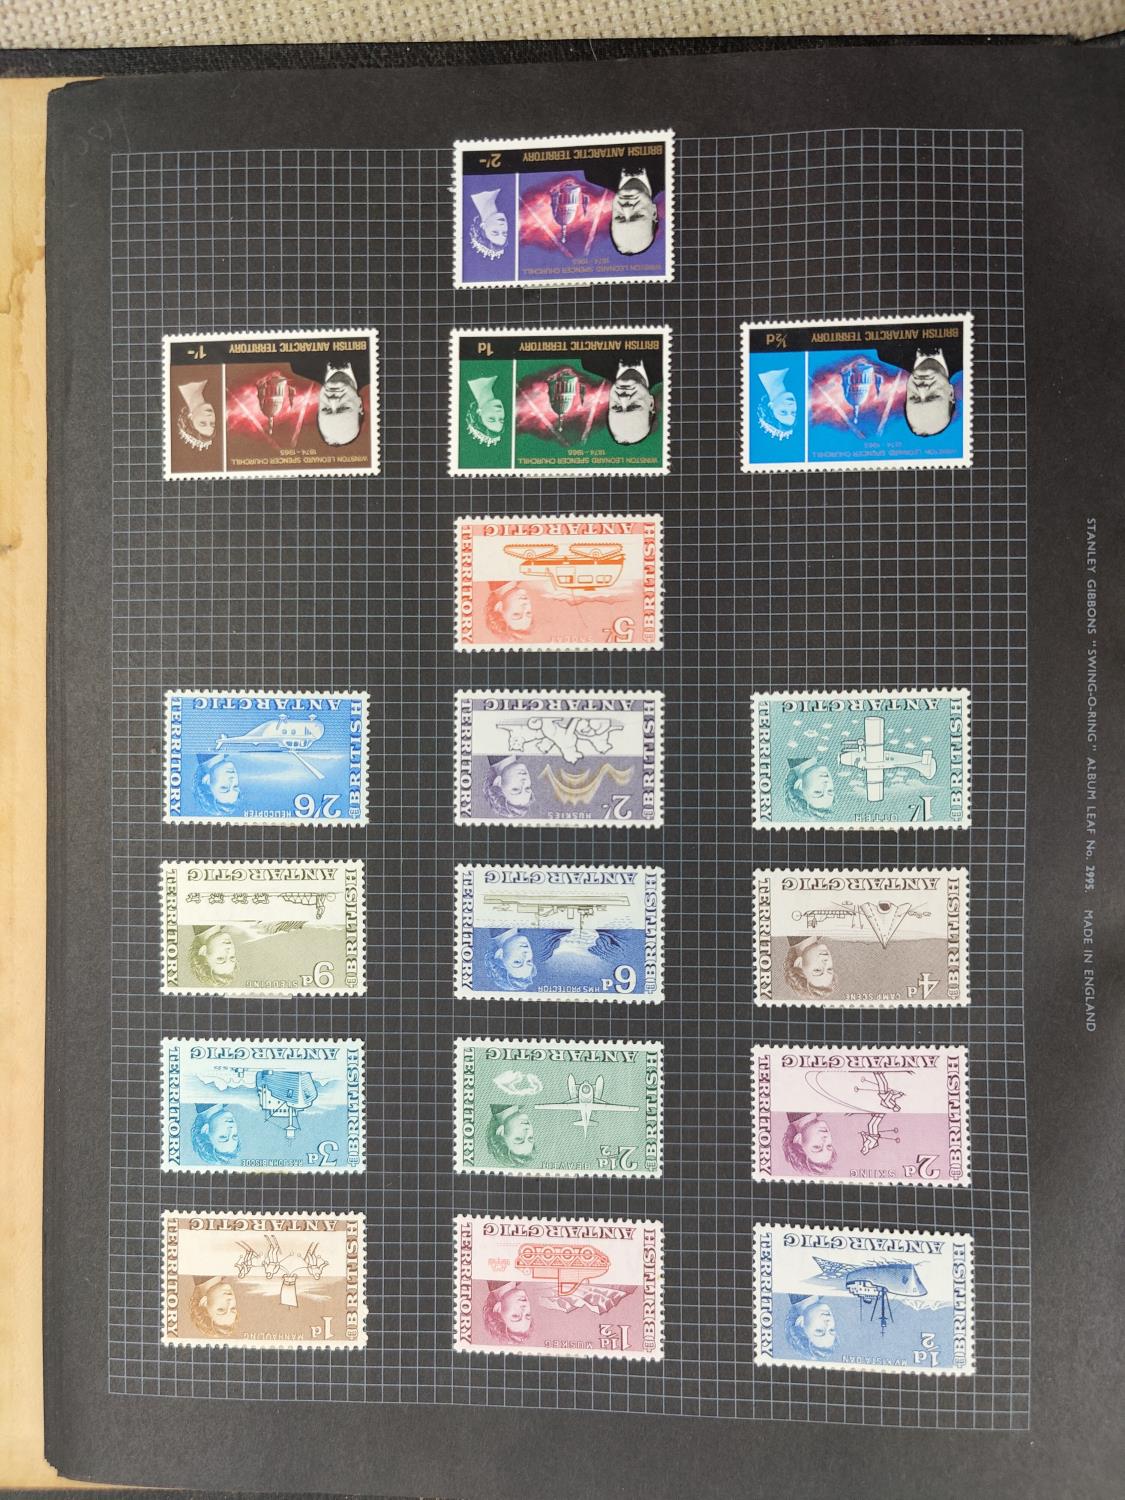 BERMUDA - QEII definitives to £1; a collection of other Commonwealth mint stamps mounted in album - Image 6 of 8